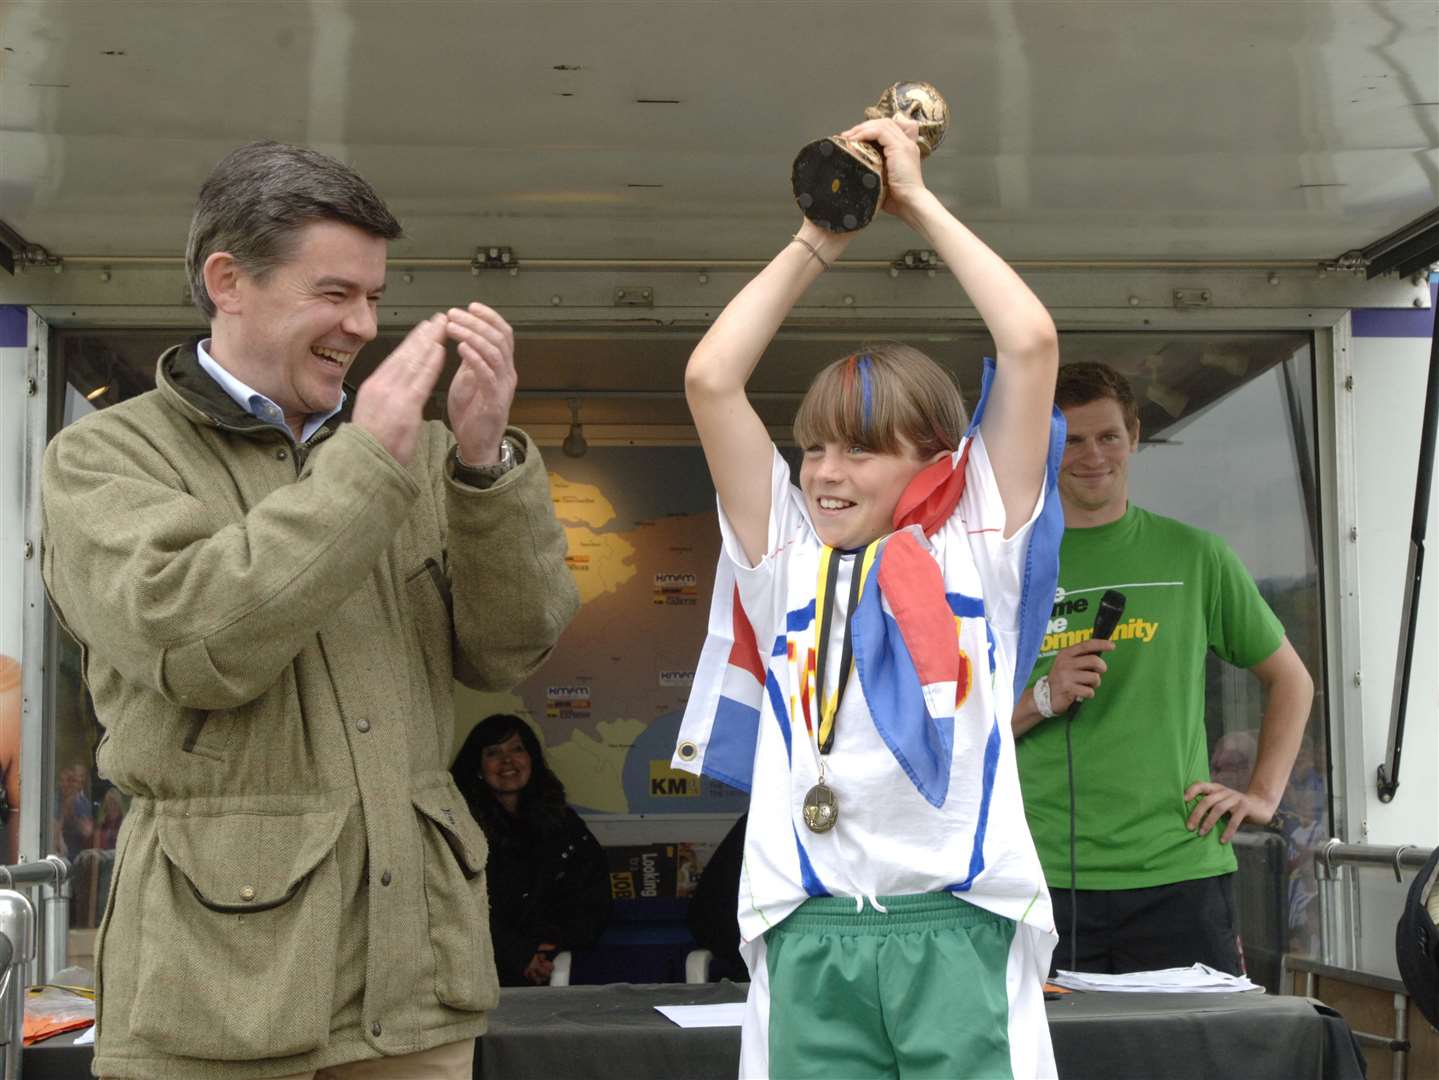 Alessia Russo was an under-10s player herself once. Here she is picking up the winner's trophy from the then MP Hugh Robertson on behalf of the East Farleigh Primary School in the Kent Messenger Mini World Cup of 2010